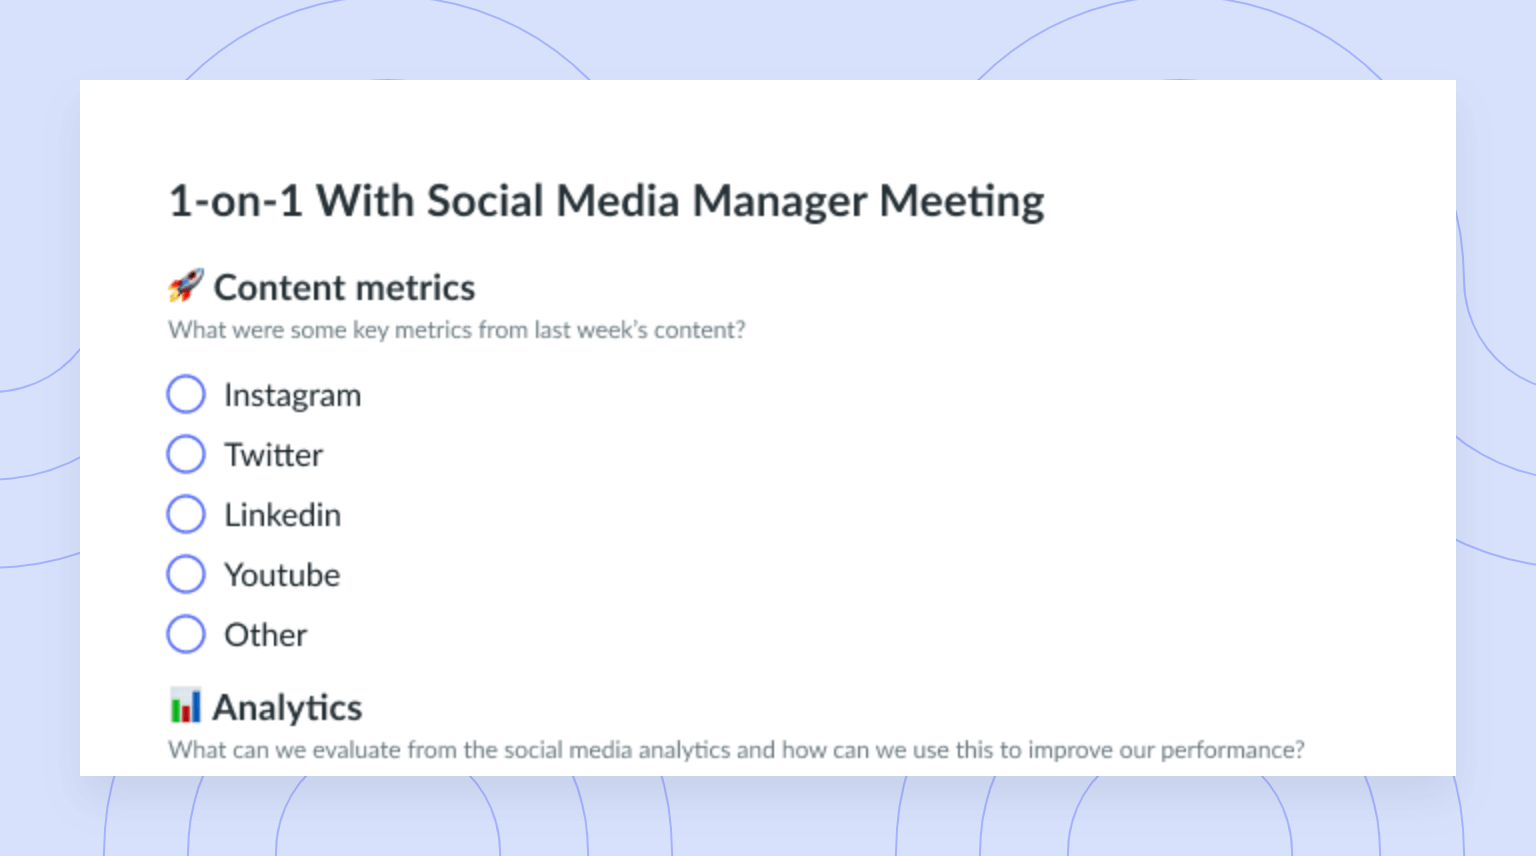 1-on-1 With Social Media Manager Meeting Template